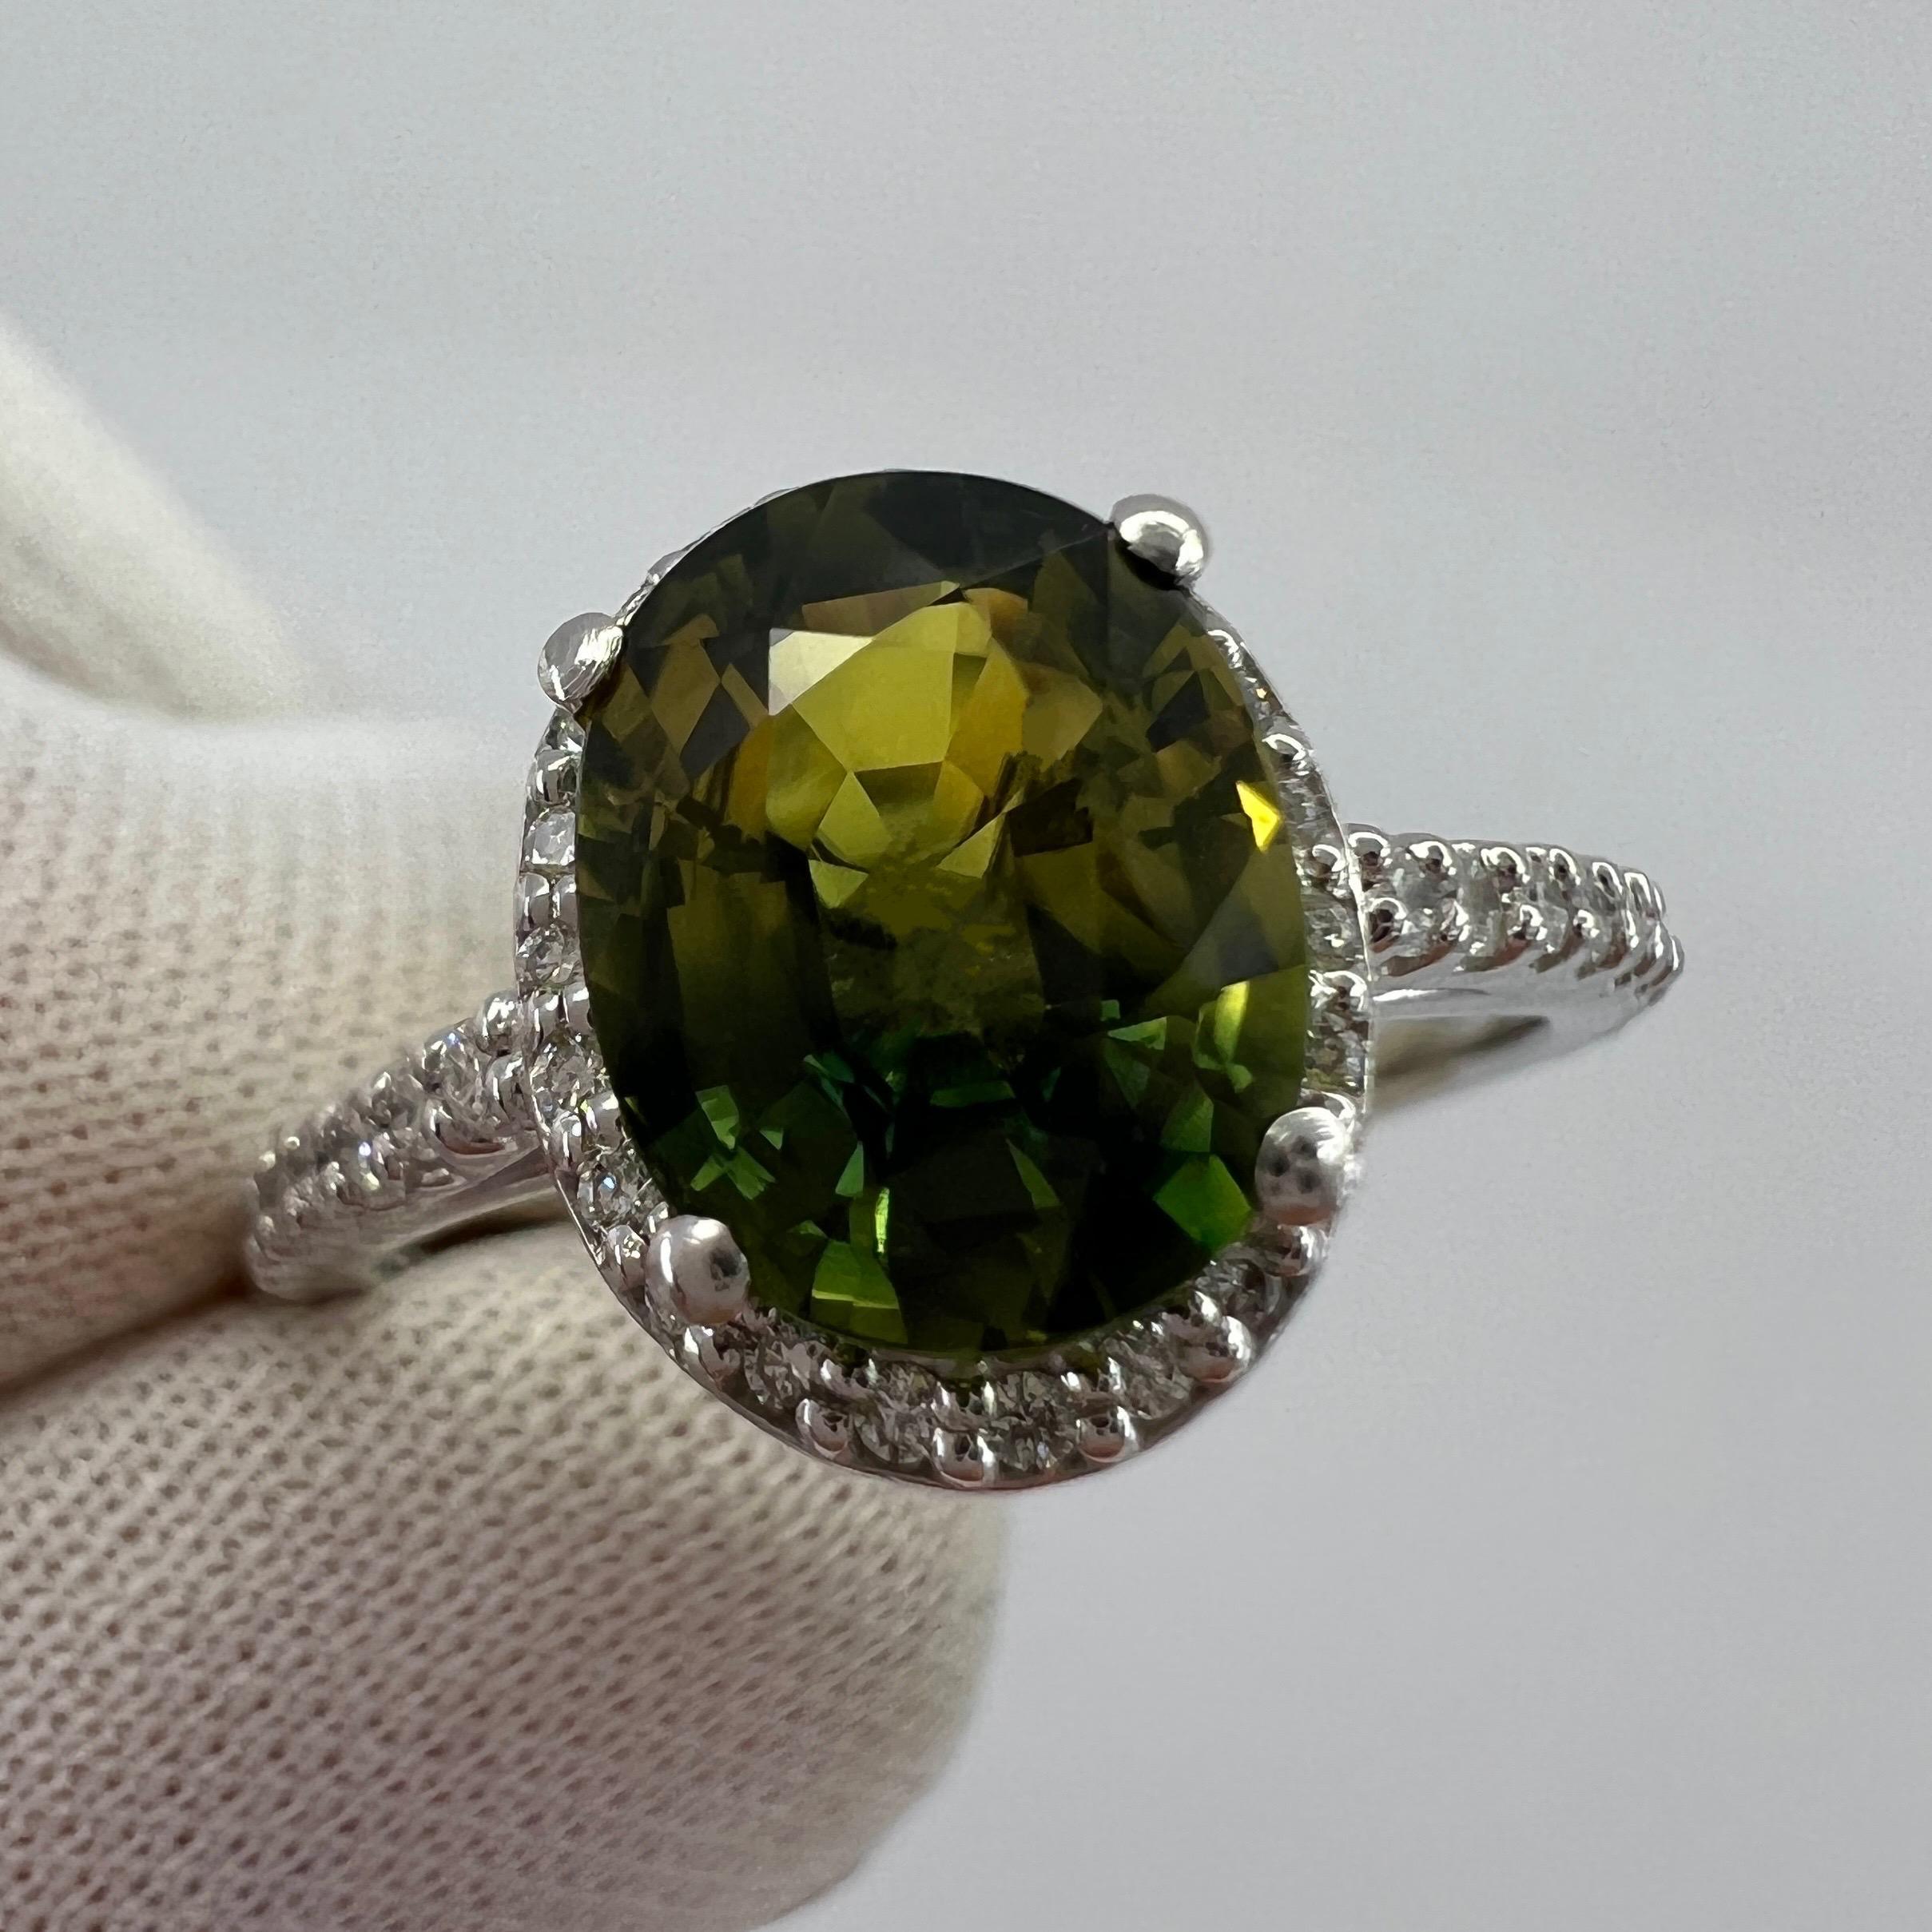 Bi Colour Green Yellow Australian Sapphire & Diamond Platinum Halo Ring.

Unique 2.31 carat Australian sapphire with a stunning yellow green bi colour effect. Rare and unique stone. 

Also has excellent clarity, very clean stone with only some small